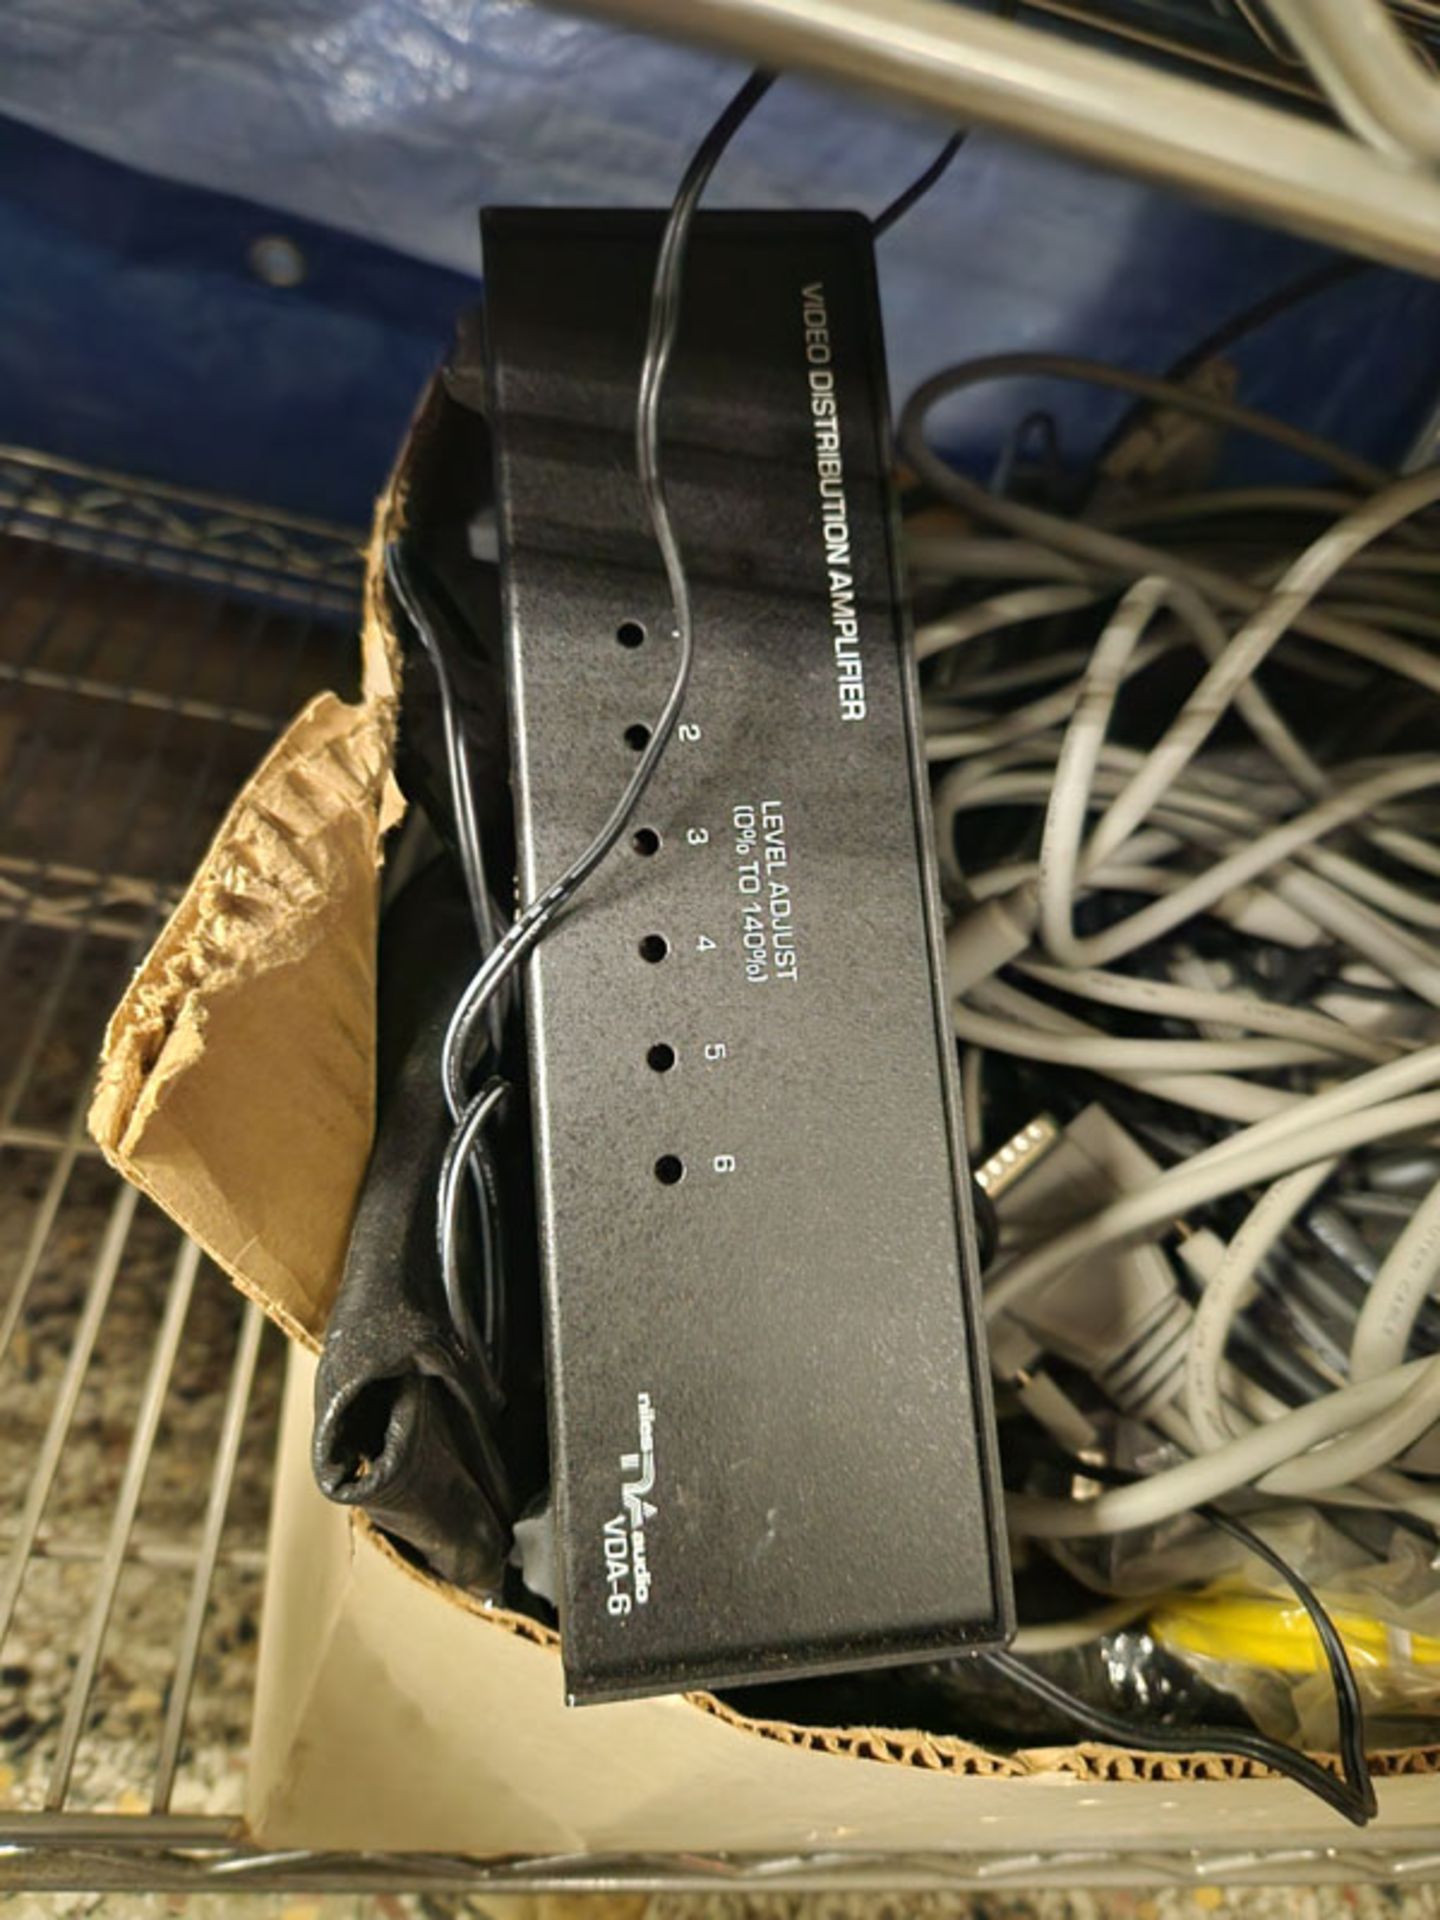 VIDEO DISTRIBUTION AMPLIFIER AND MISCELLANOUS CORDS IN BOX - Image 2 of 3